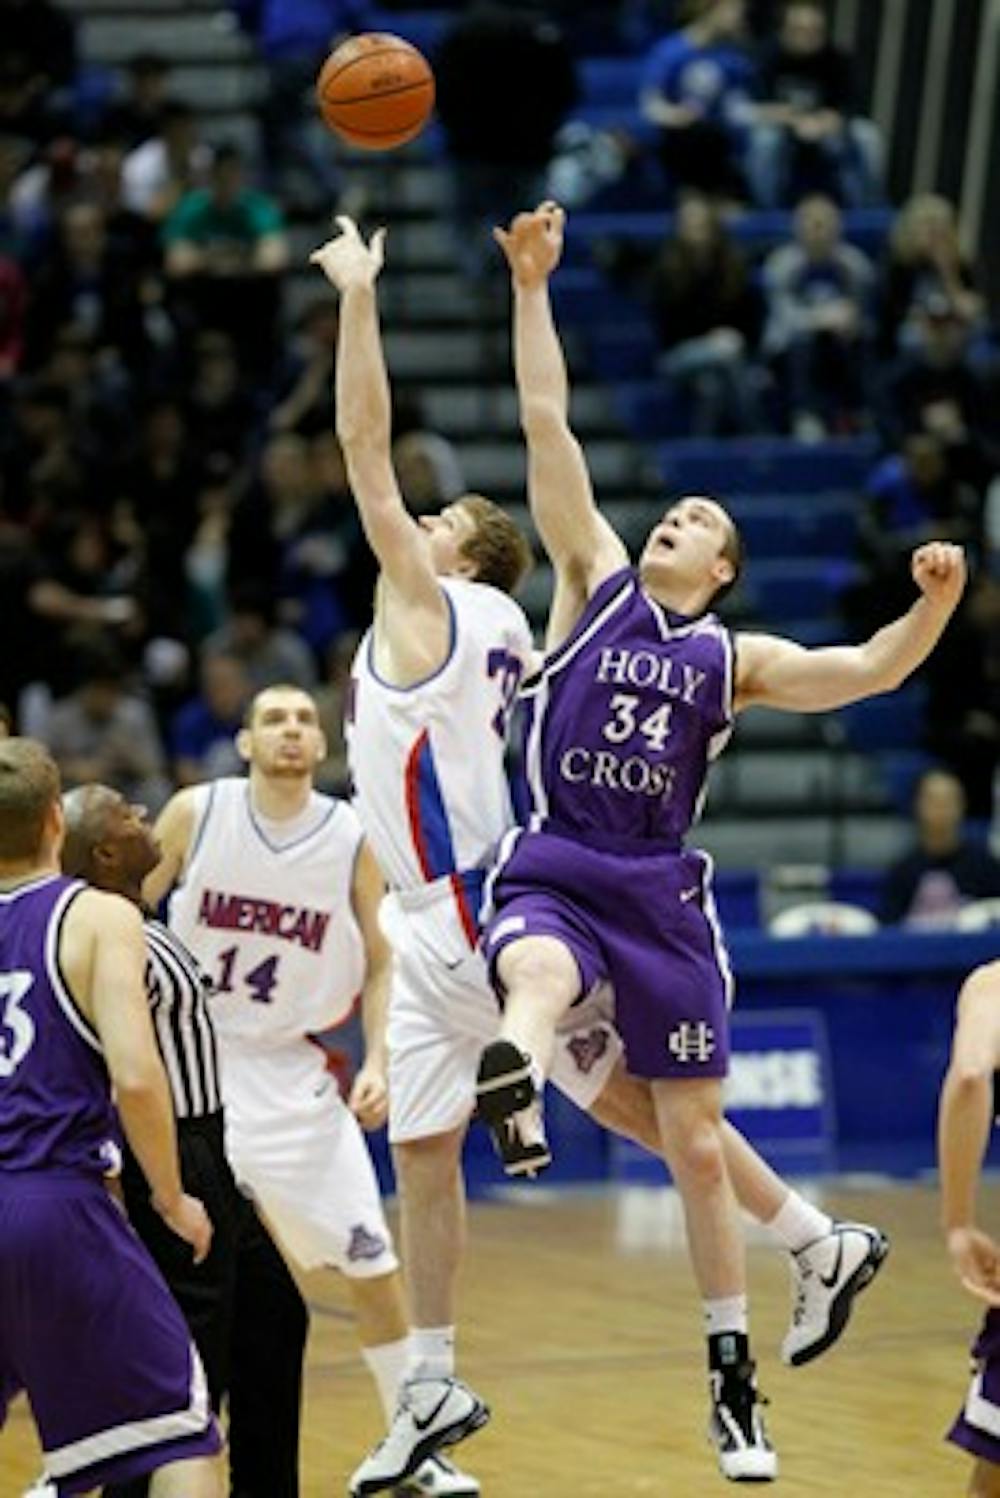 JUMPING UP â€” Stephen Lumpkins fights for a ball in the air against Holy Cross as Vlad Moldoveanu looks on during Saturdayâ€™s â€œPhil Benderâ€ event. AU won 71-64 and gave Head Coach Jeff Jones his 300th win at AU. It was the Eaglesâ€™ second win in Patriot League play. 